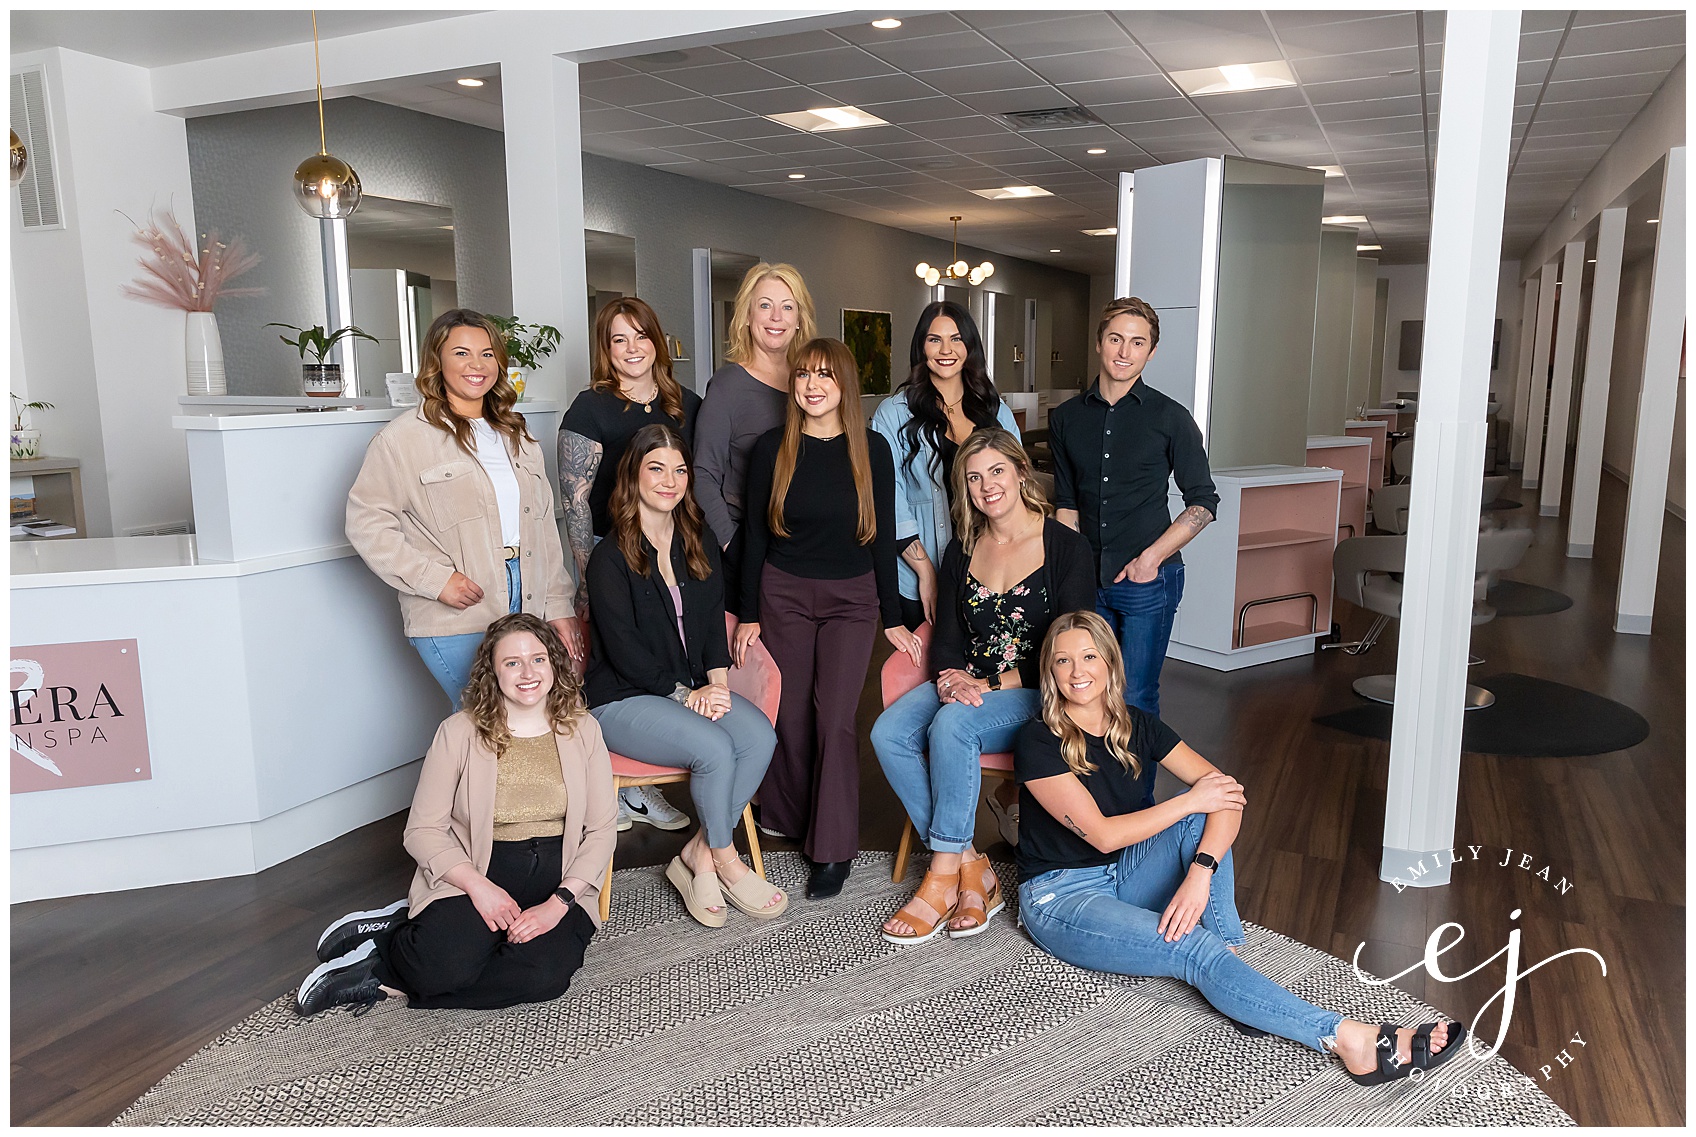 Team of hair stylists and estheticians with massage therapist Riviera SalonSpa La Crosse, Wisconsin North Side of La Crosse